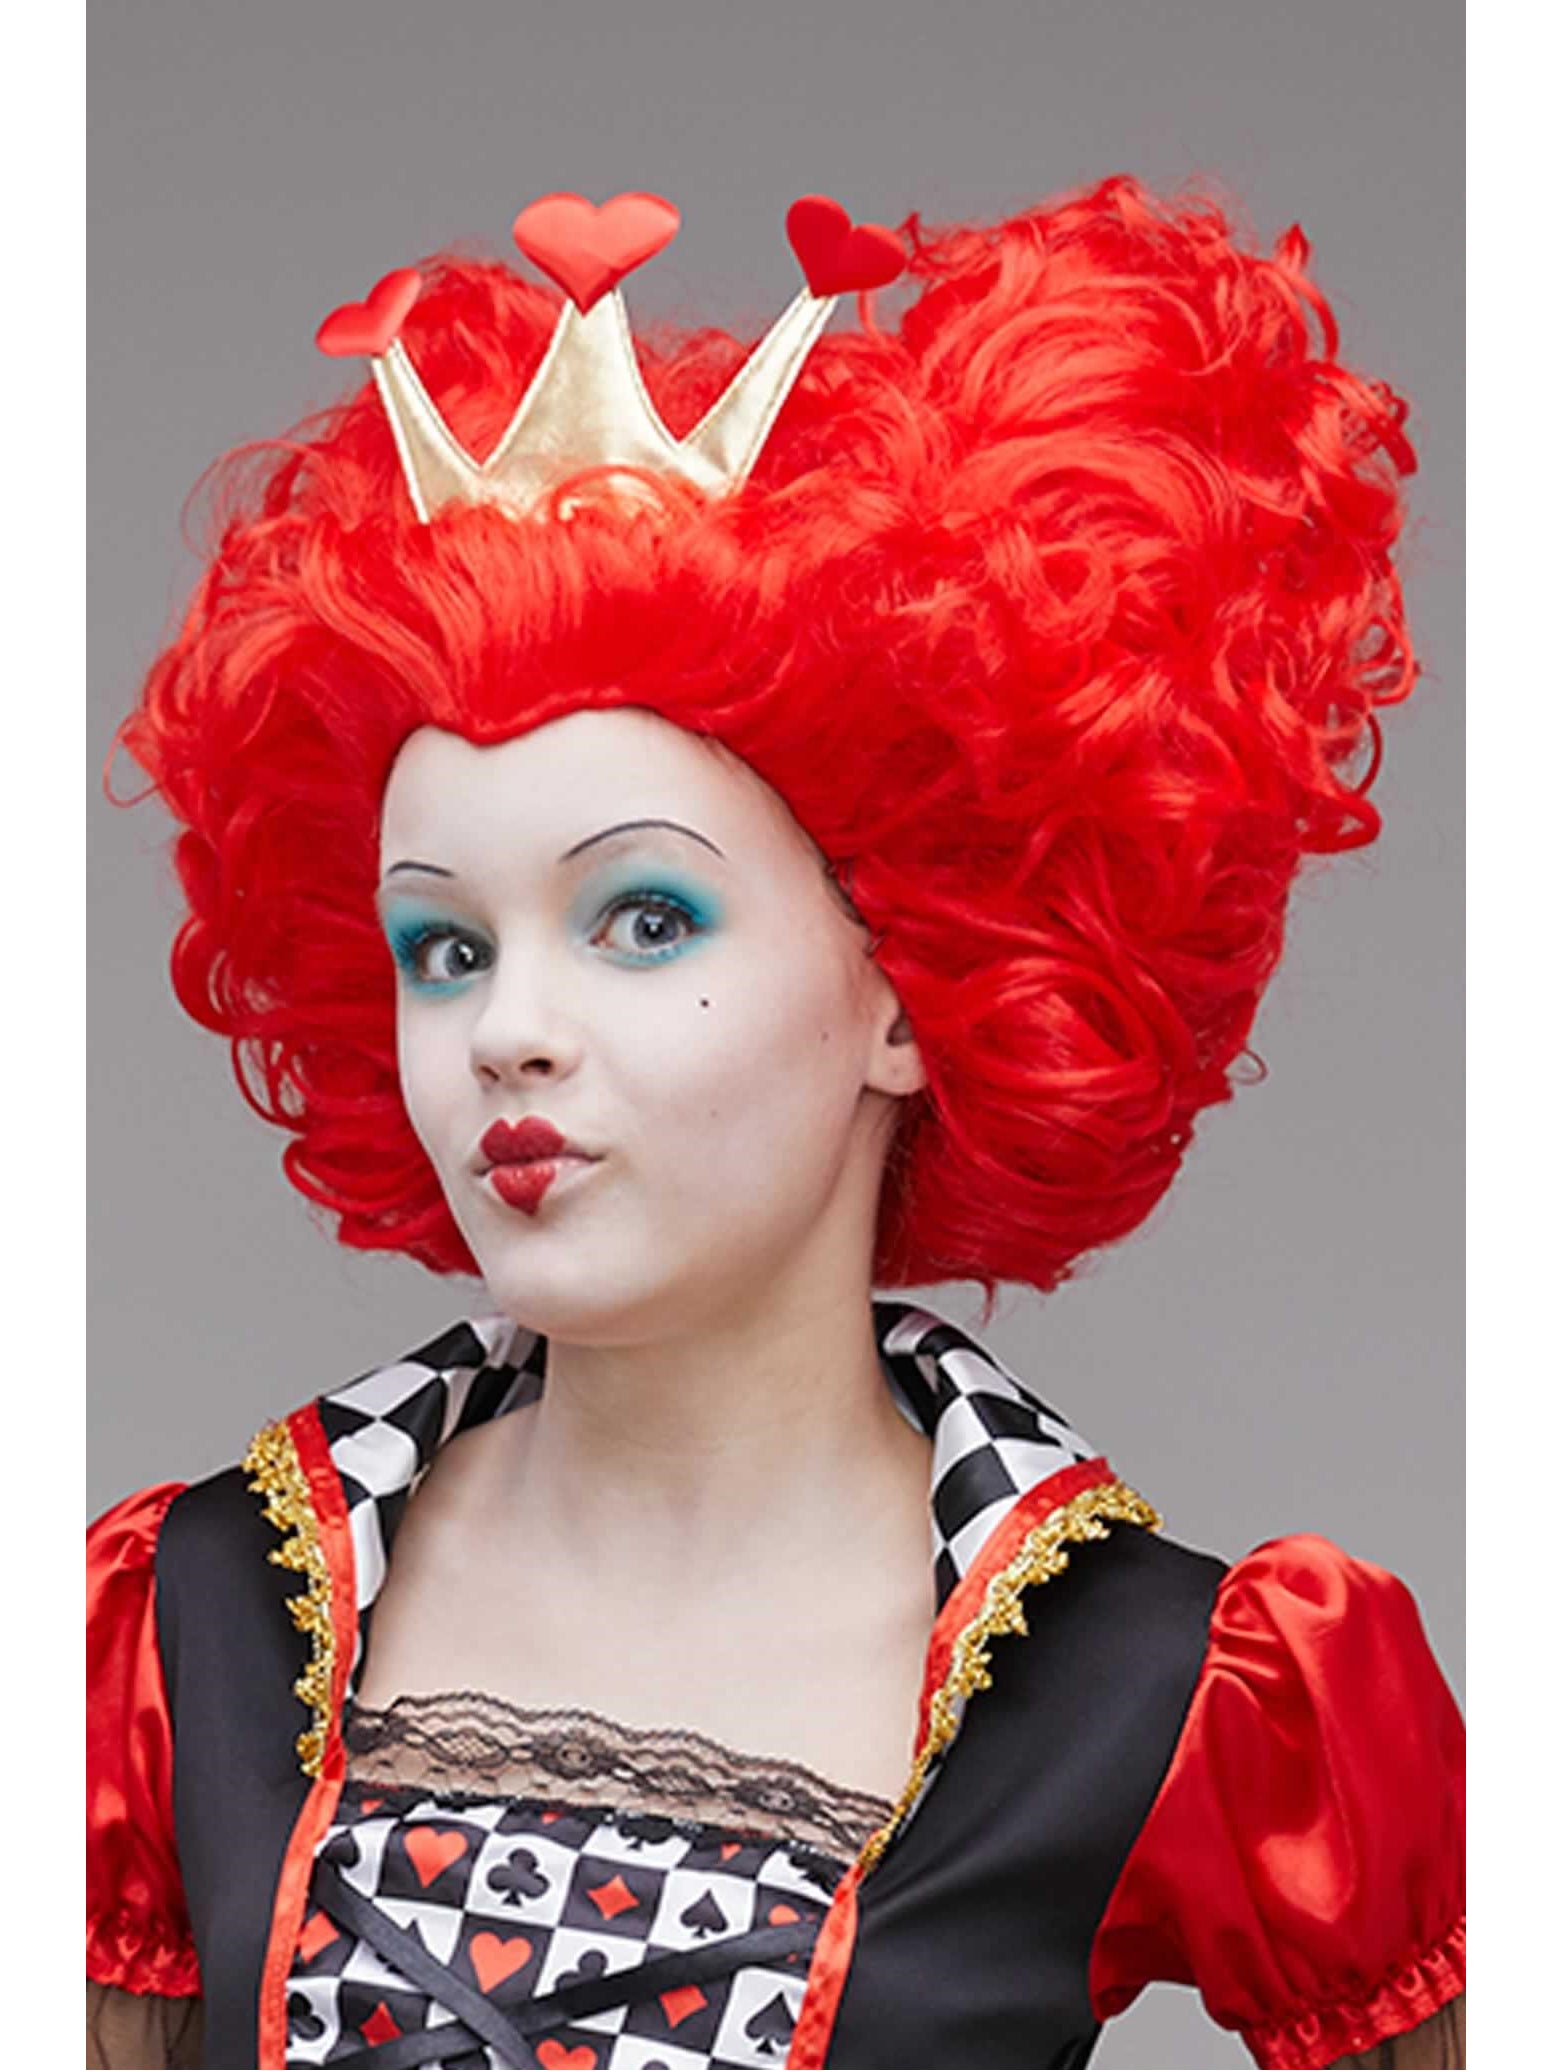 Queen of Hearts Wig | Storybook | Costumes & Dress-up - Chasing Fireflies